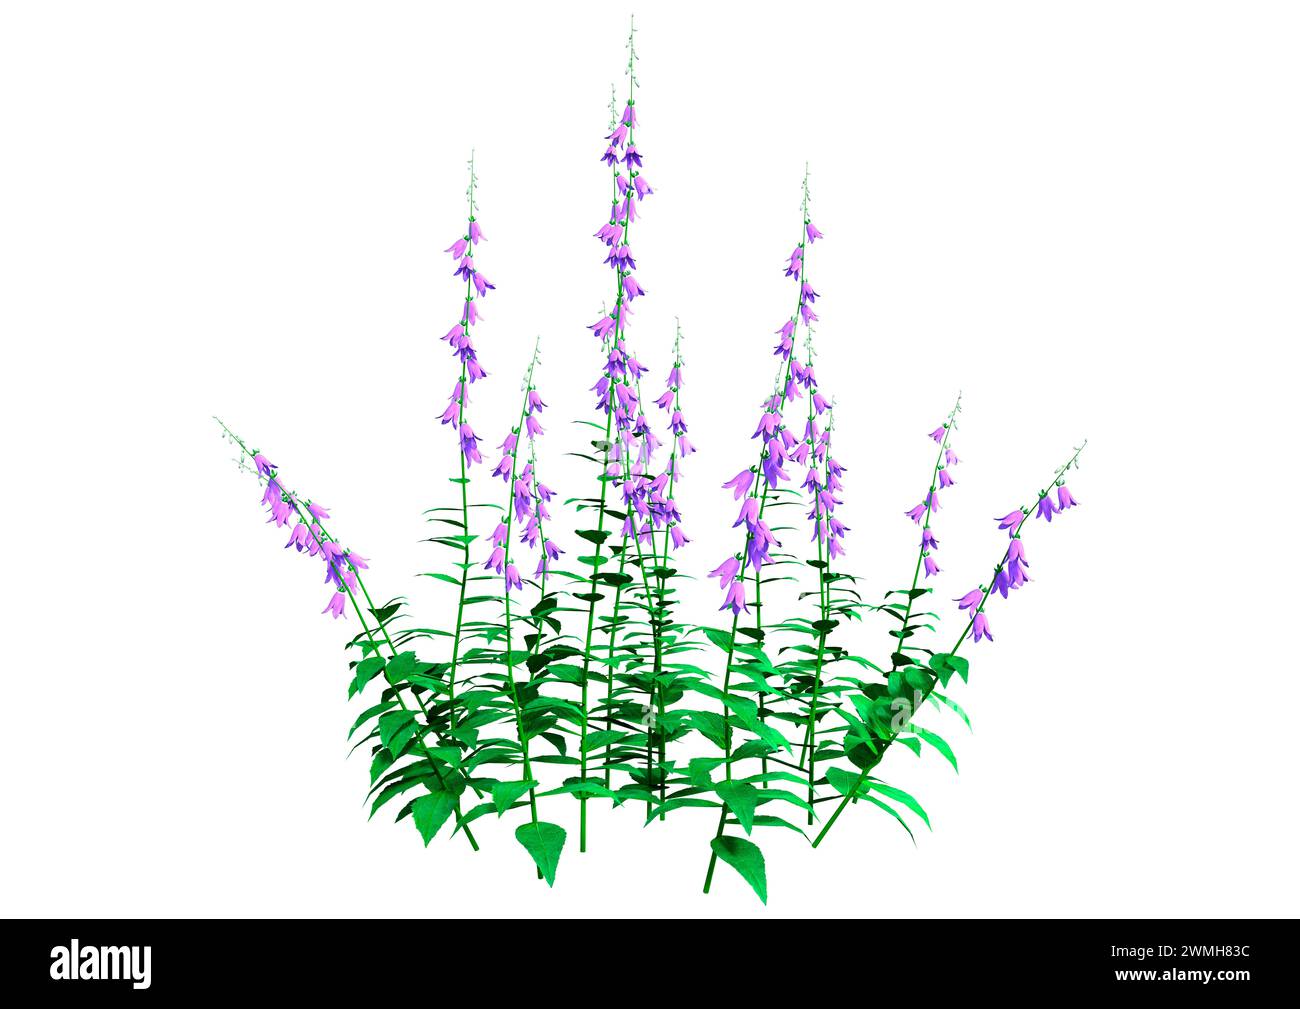 3D rendering of blooming campanula plants or bellflowers isolated on white background Stock Photo